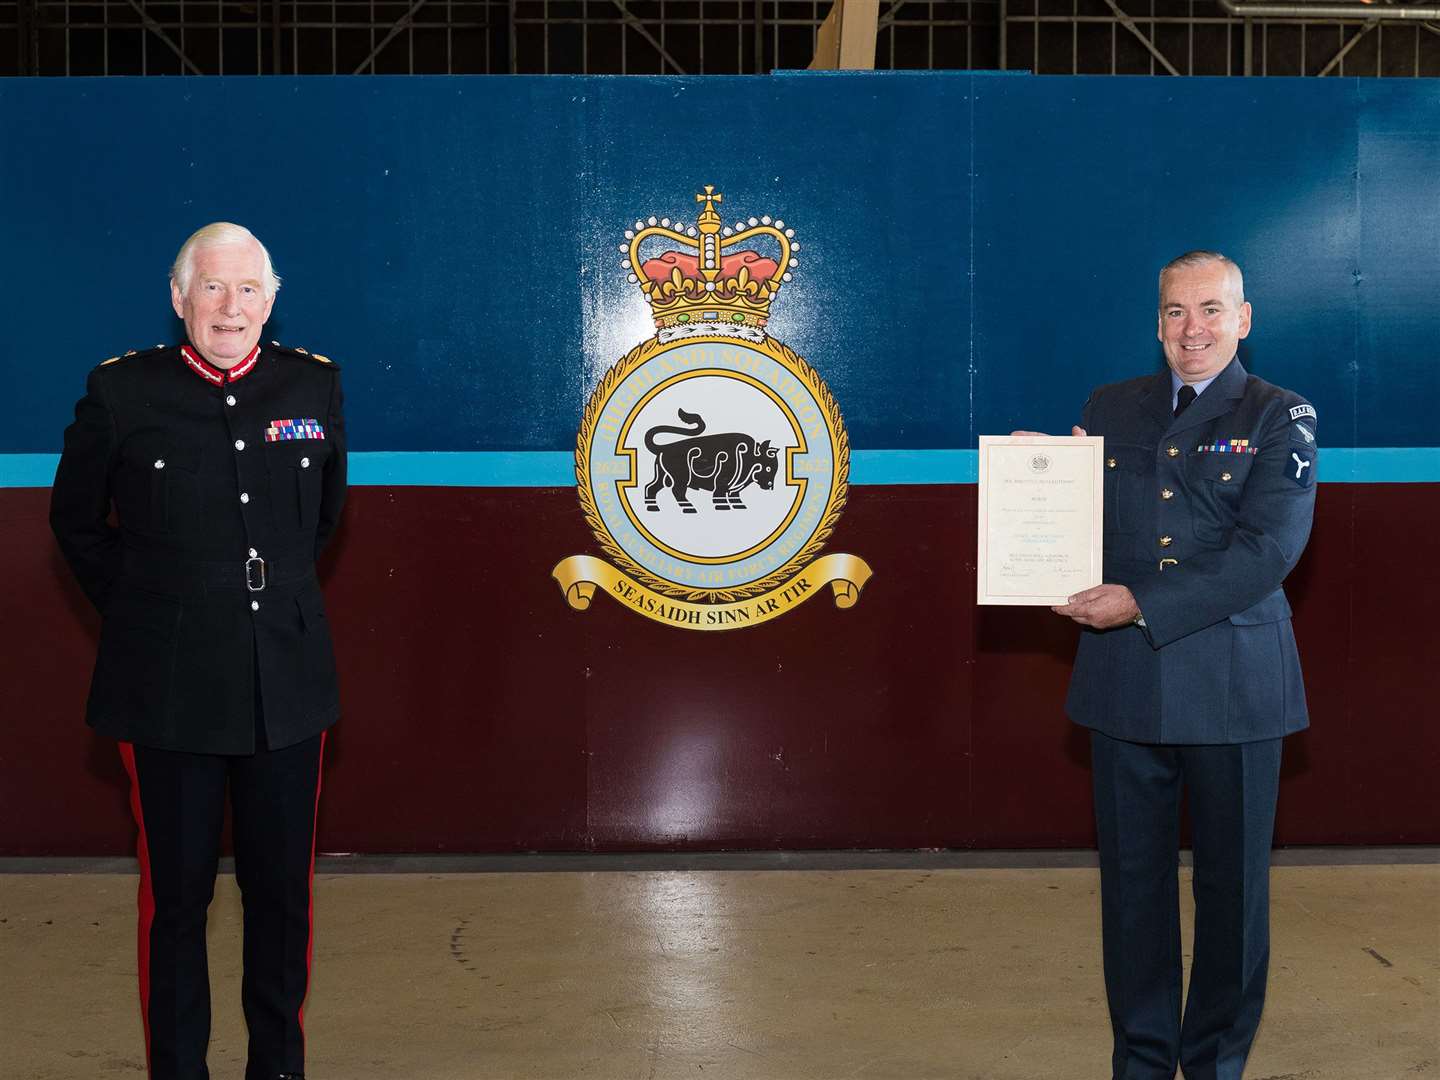 SAC Eddy Imlah is presented with his Meritorious Service certificate by the Lord Lieutenant of Moray, Major General Seymour Monro.